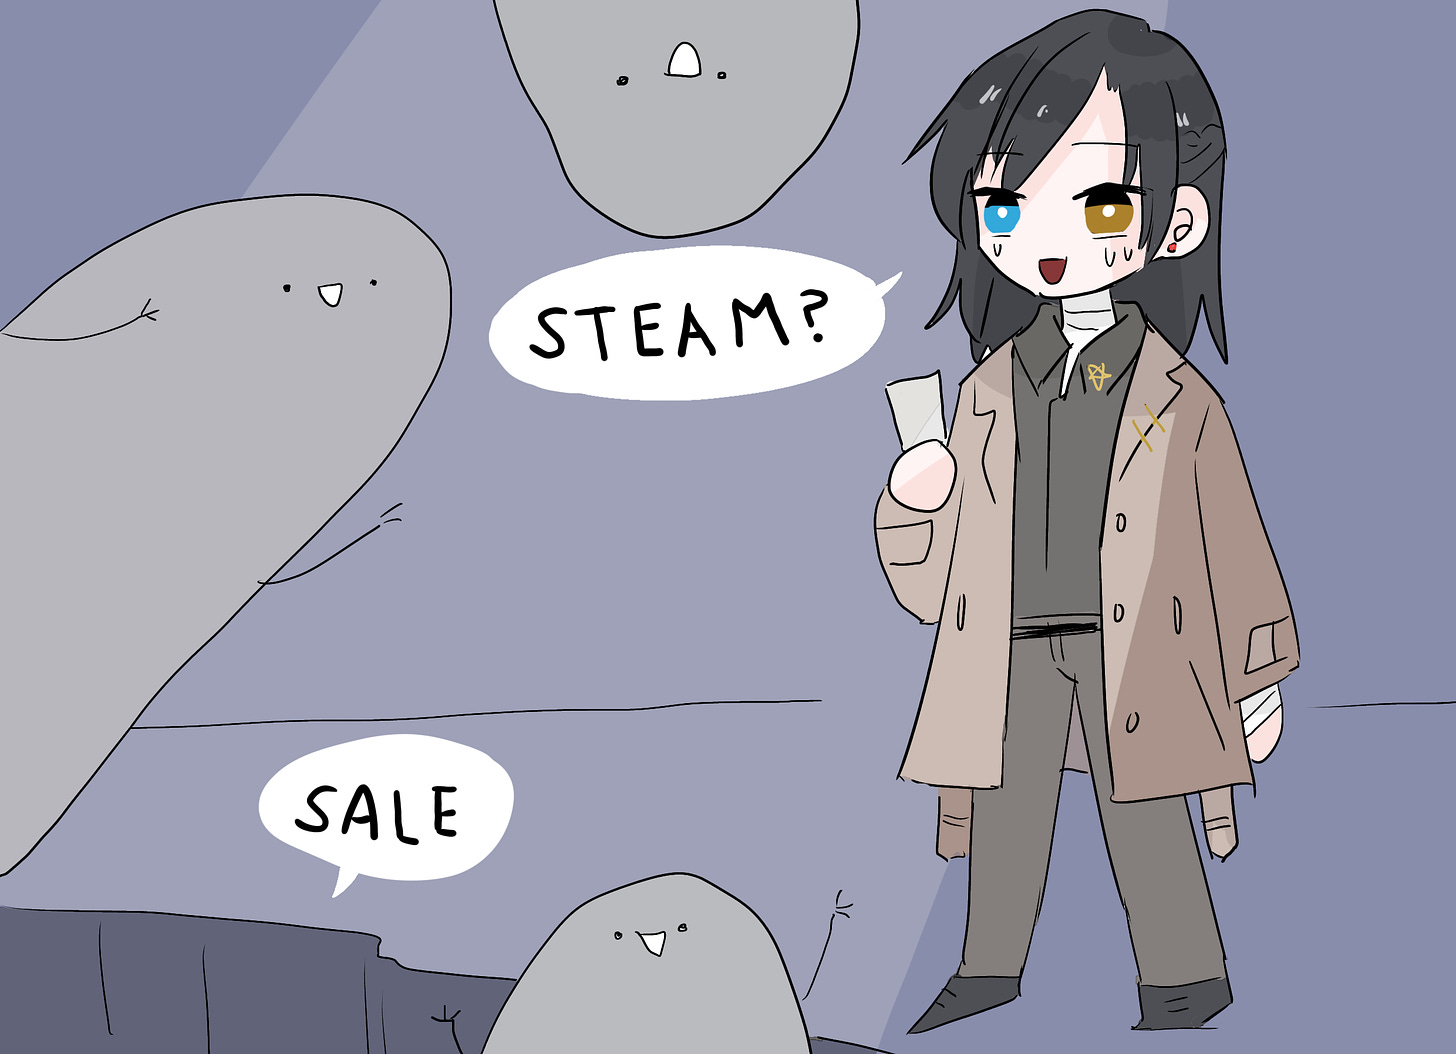 LoA MC Mana looking into a pit while surrounded by 3 strange creatures. She asks "Steam?" and the pit responds "sale"